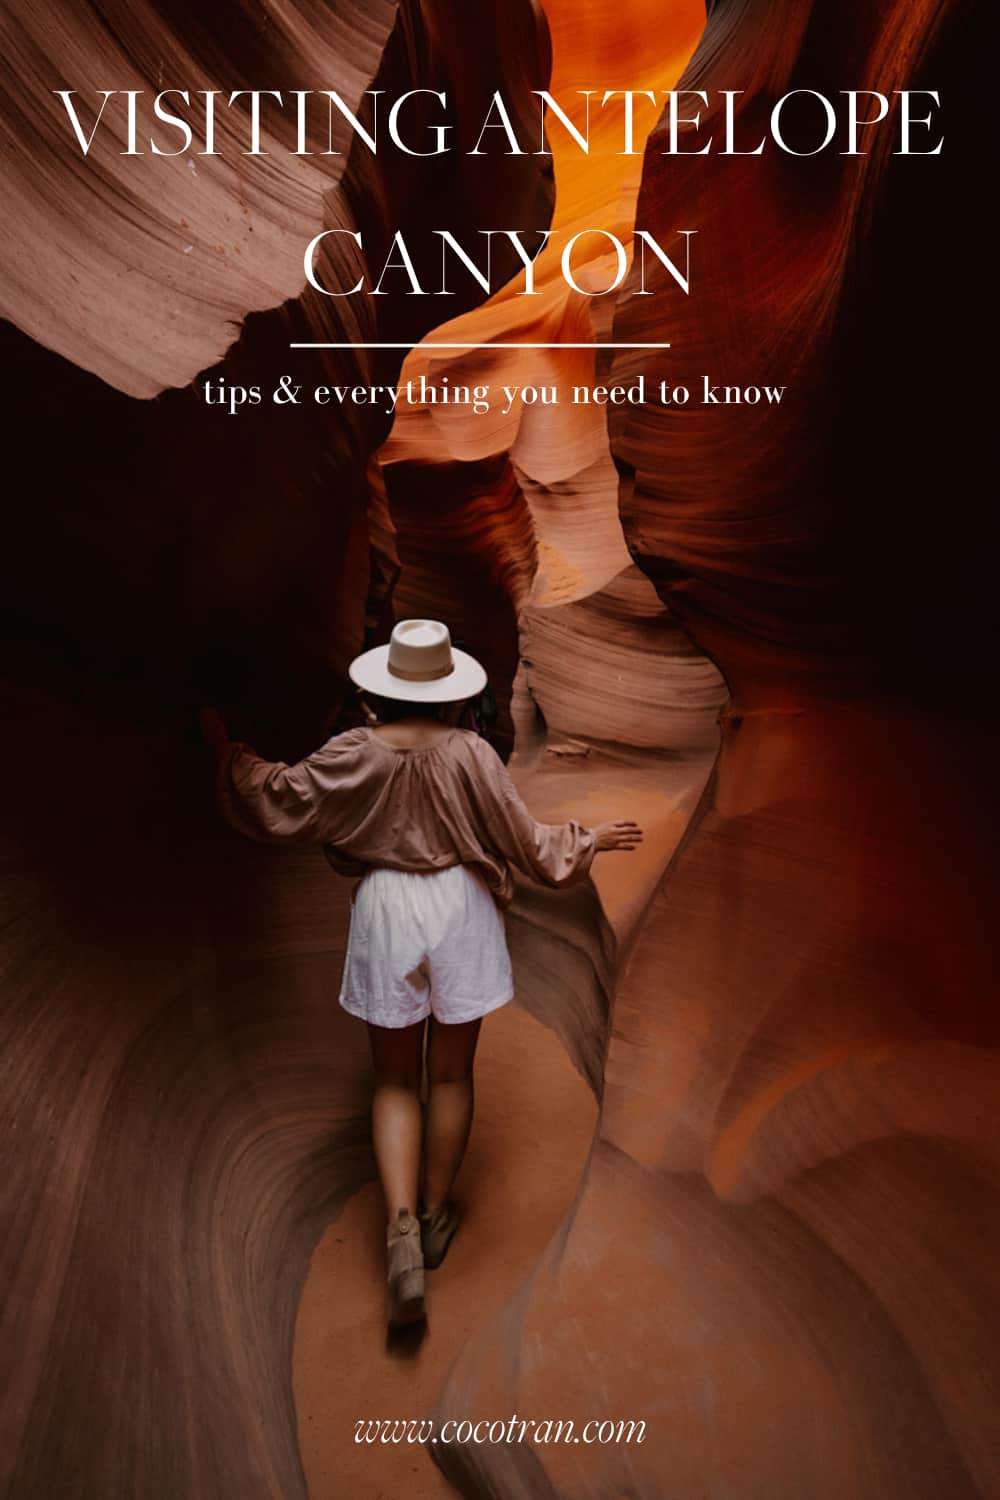 Coco Tran — Aesthetic Travel Blog By Film Photographer Coco Tran https://cocotran.com/best-time-to-visit-antelope-canyon/